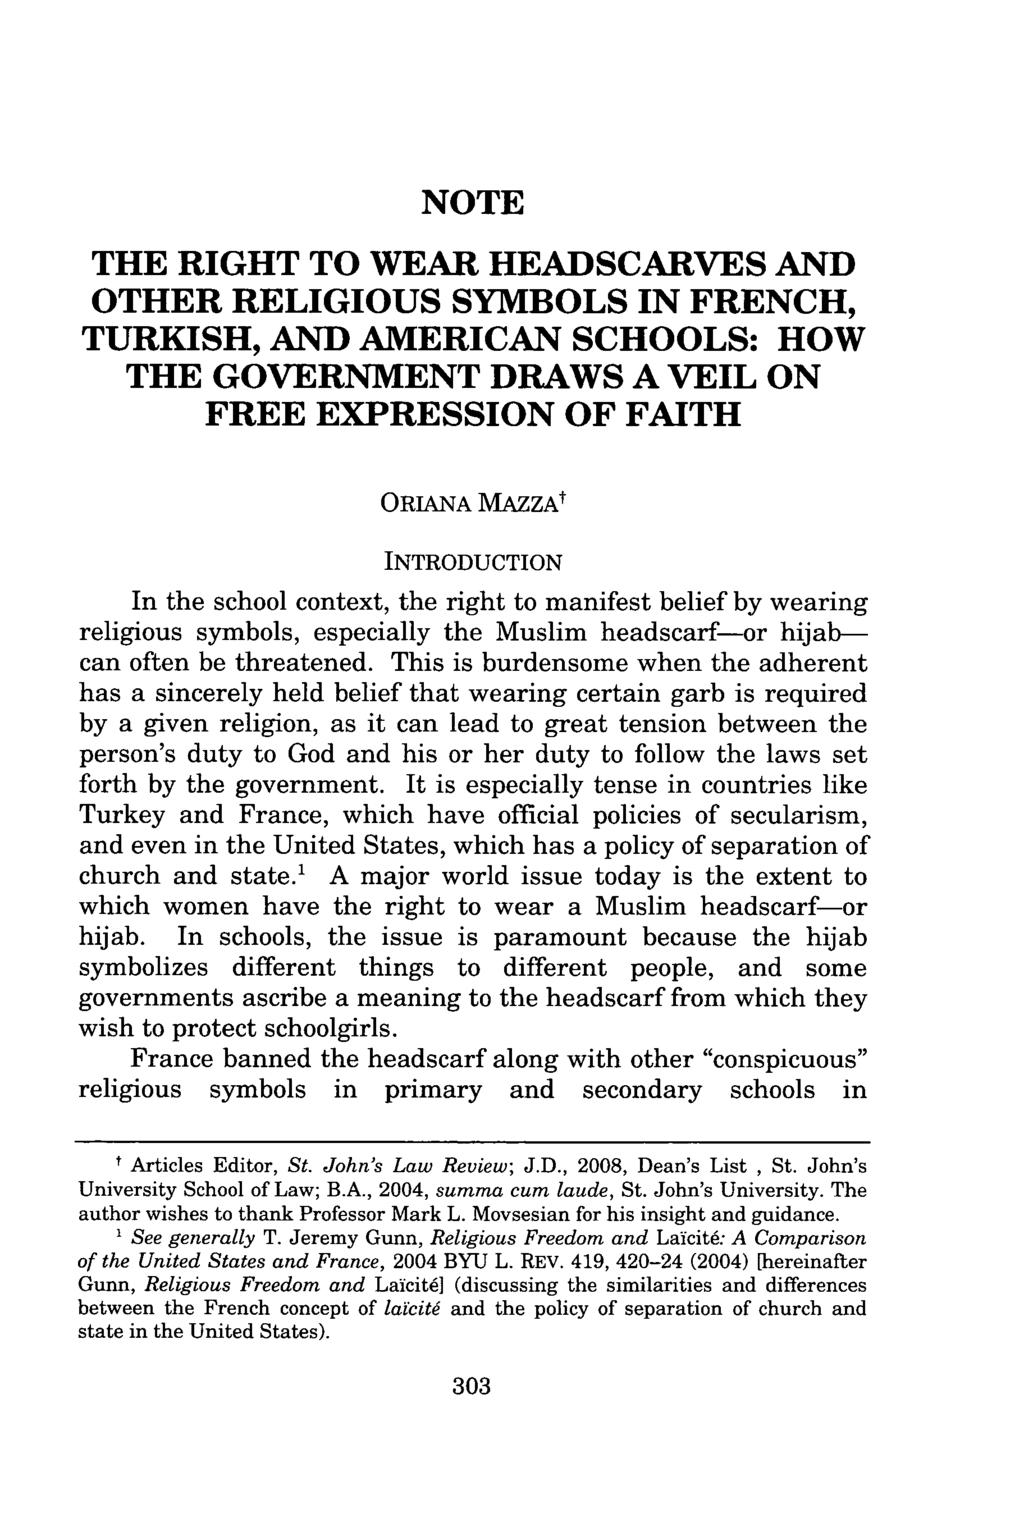 NOTE THE RIGHT TO WEAR HEADSCARVES AND OTHER RELIGIOUS SYMBOLS IN FRENCH, TURKISH, AND AMERICAN SCHOOLS: HOW THE GOVERNMENT DRAWS A VEIL ON FREE EXPRESSION OF FAITH ORIANA MAZZAt INTRODUCTION In the